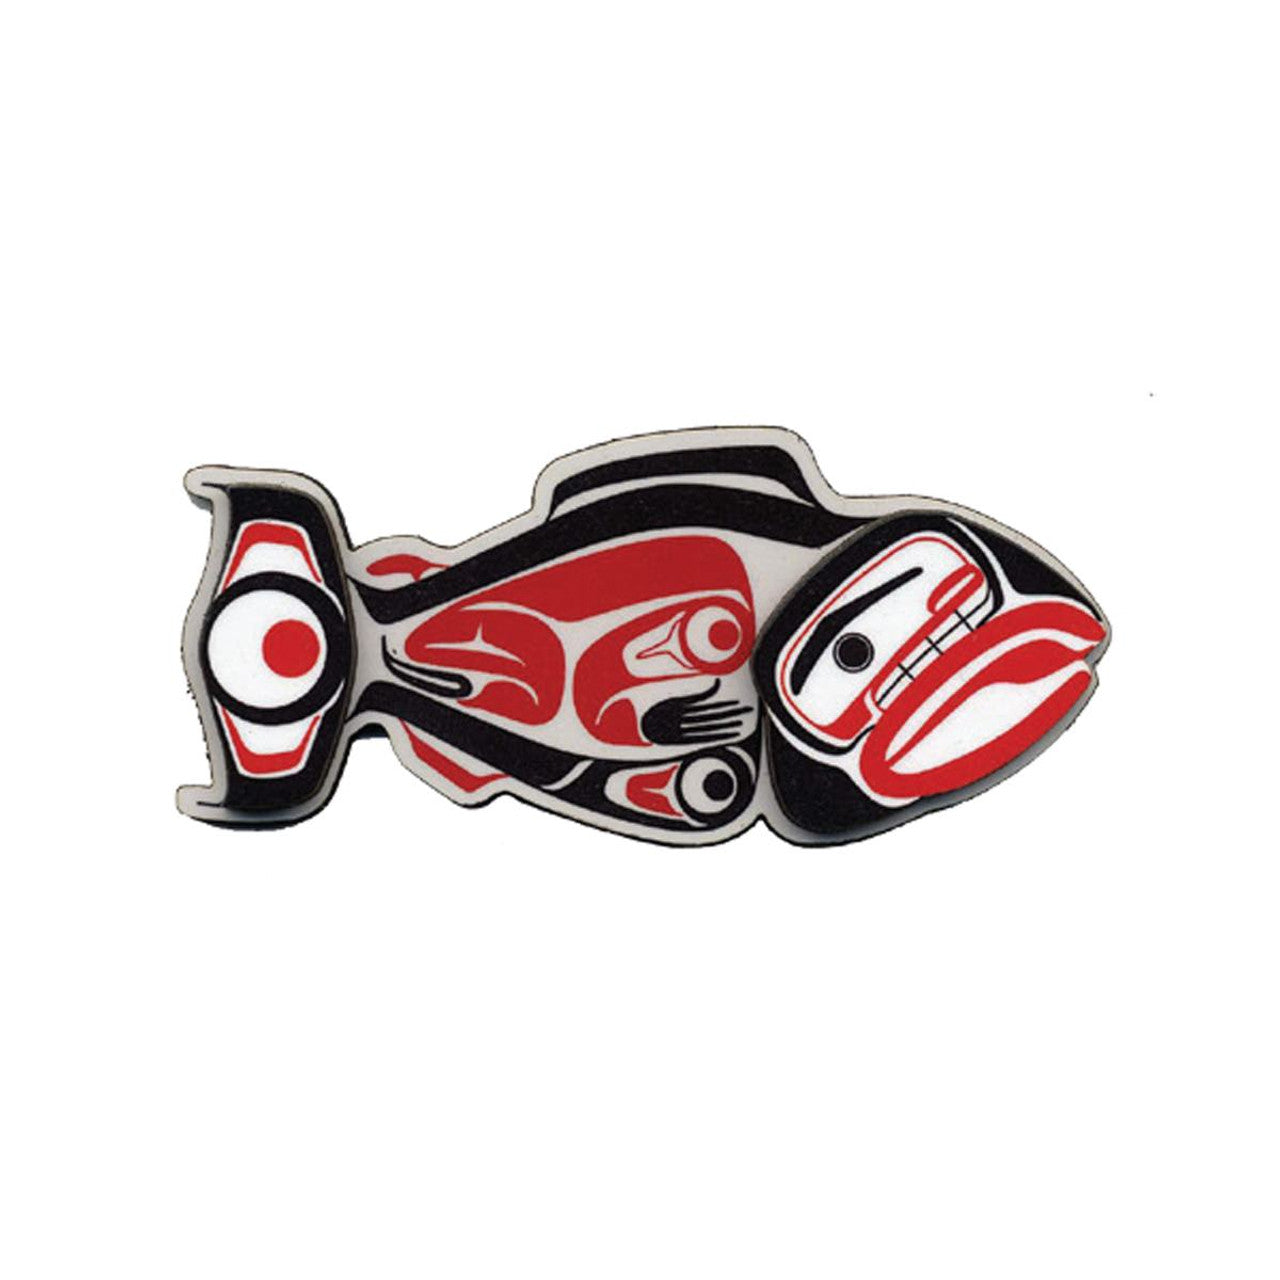 3D MAGNETS - Eric Parnell Salmon - M313 - House of Himwitsa Native Art Gallery and Gifts